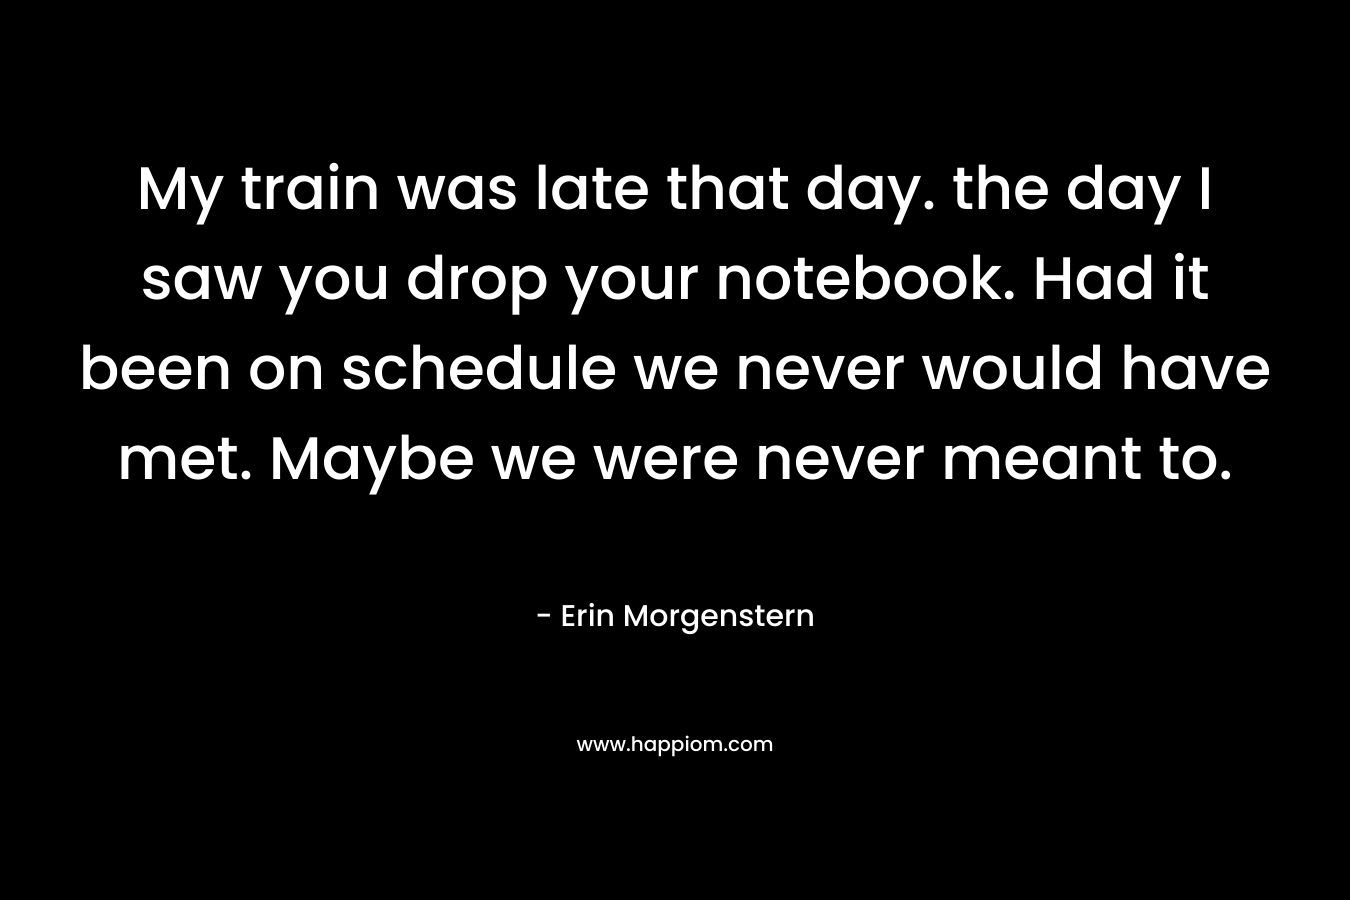 My train was late that day. the day I saw you drop your notebook. Had it been on schedule we never would have met. Maybe we were never meant to.